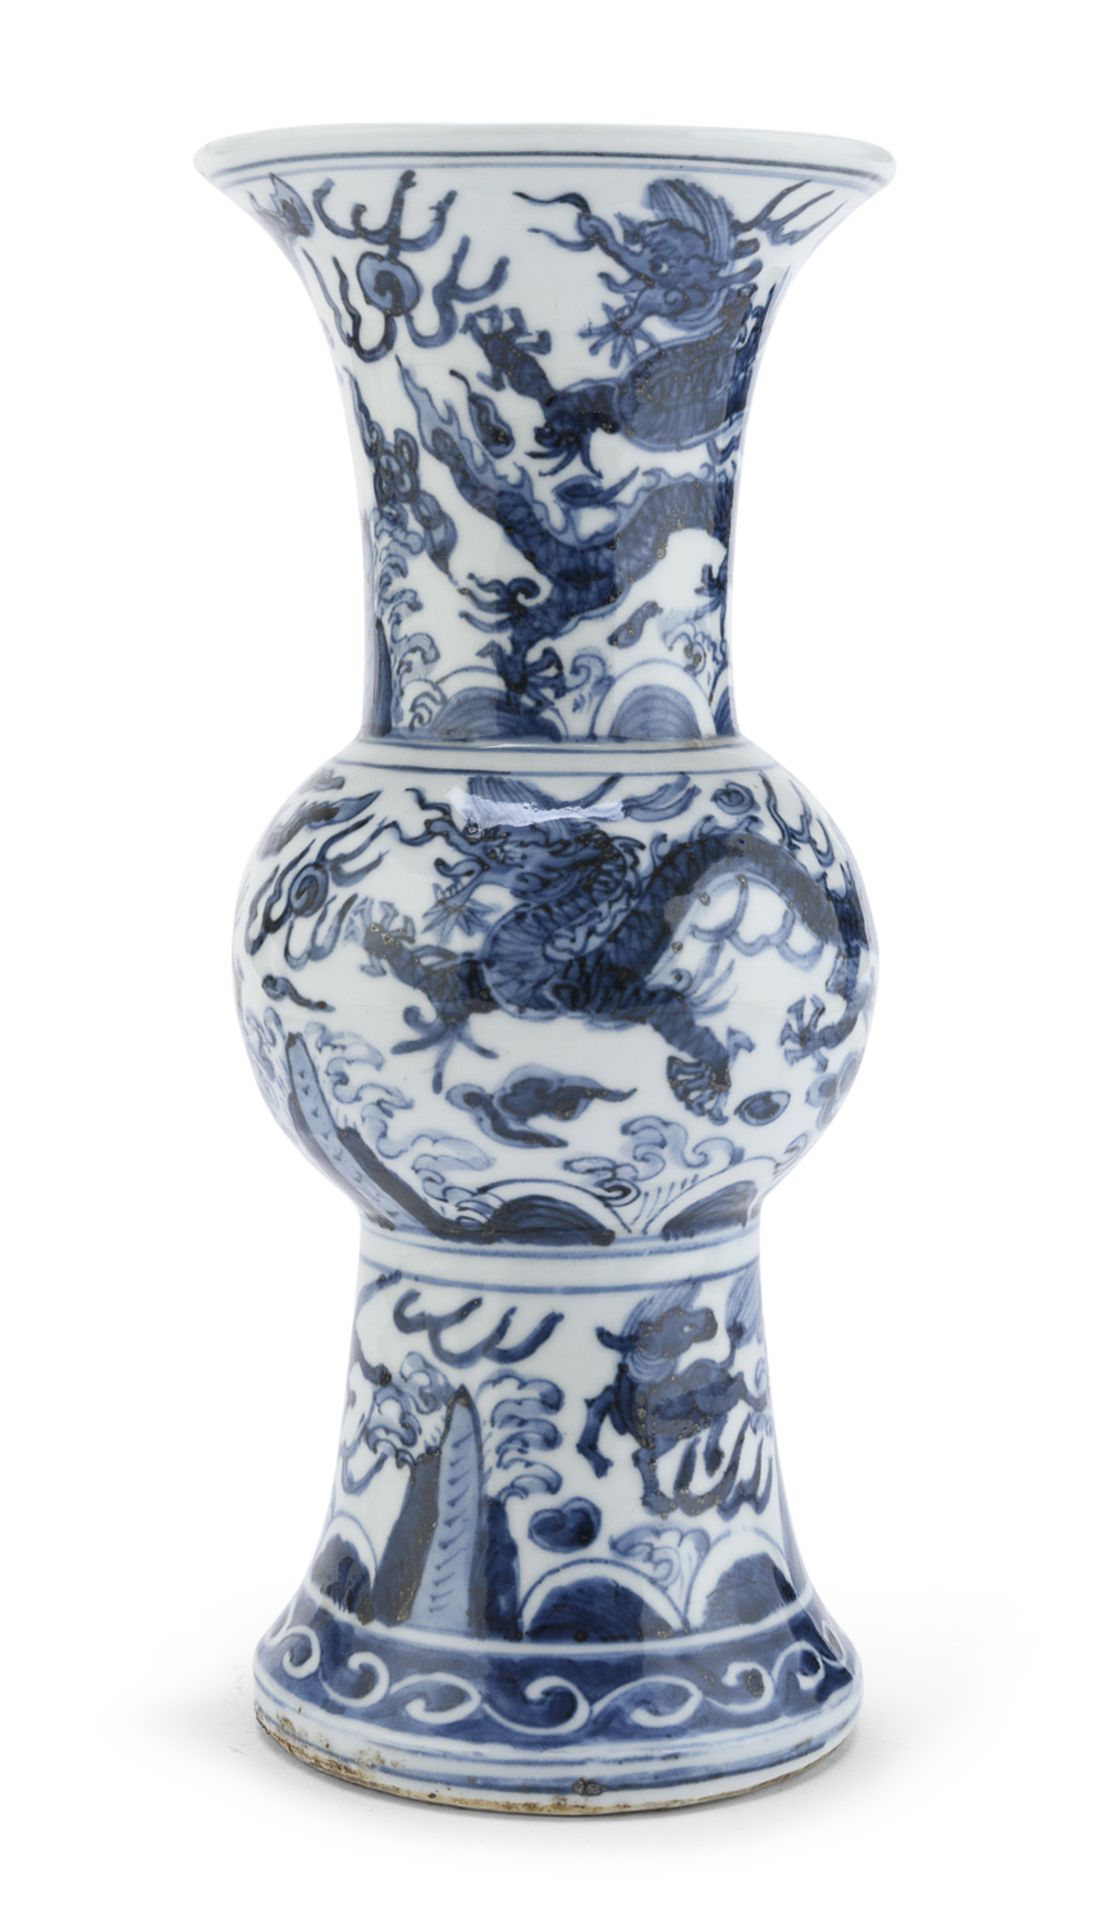 A CHINESE WHITE AND BLUE PORCELAIN VASE 19TH CENTURY.